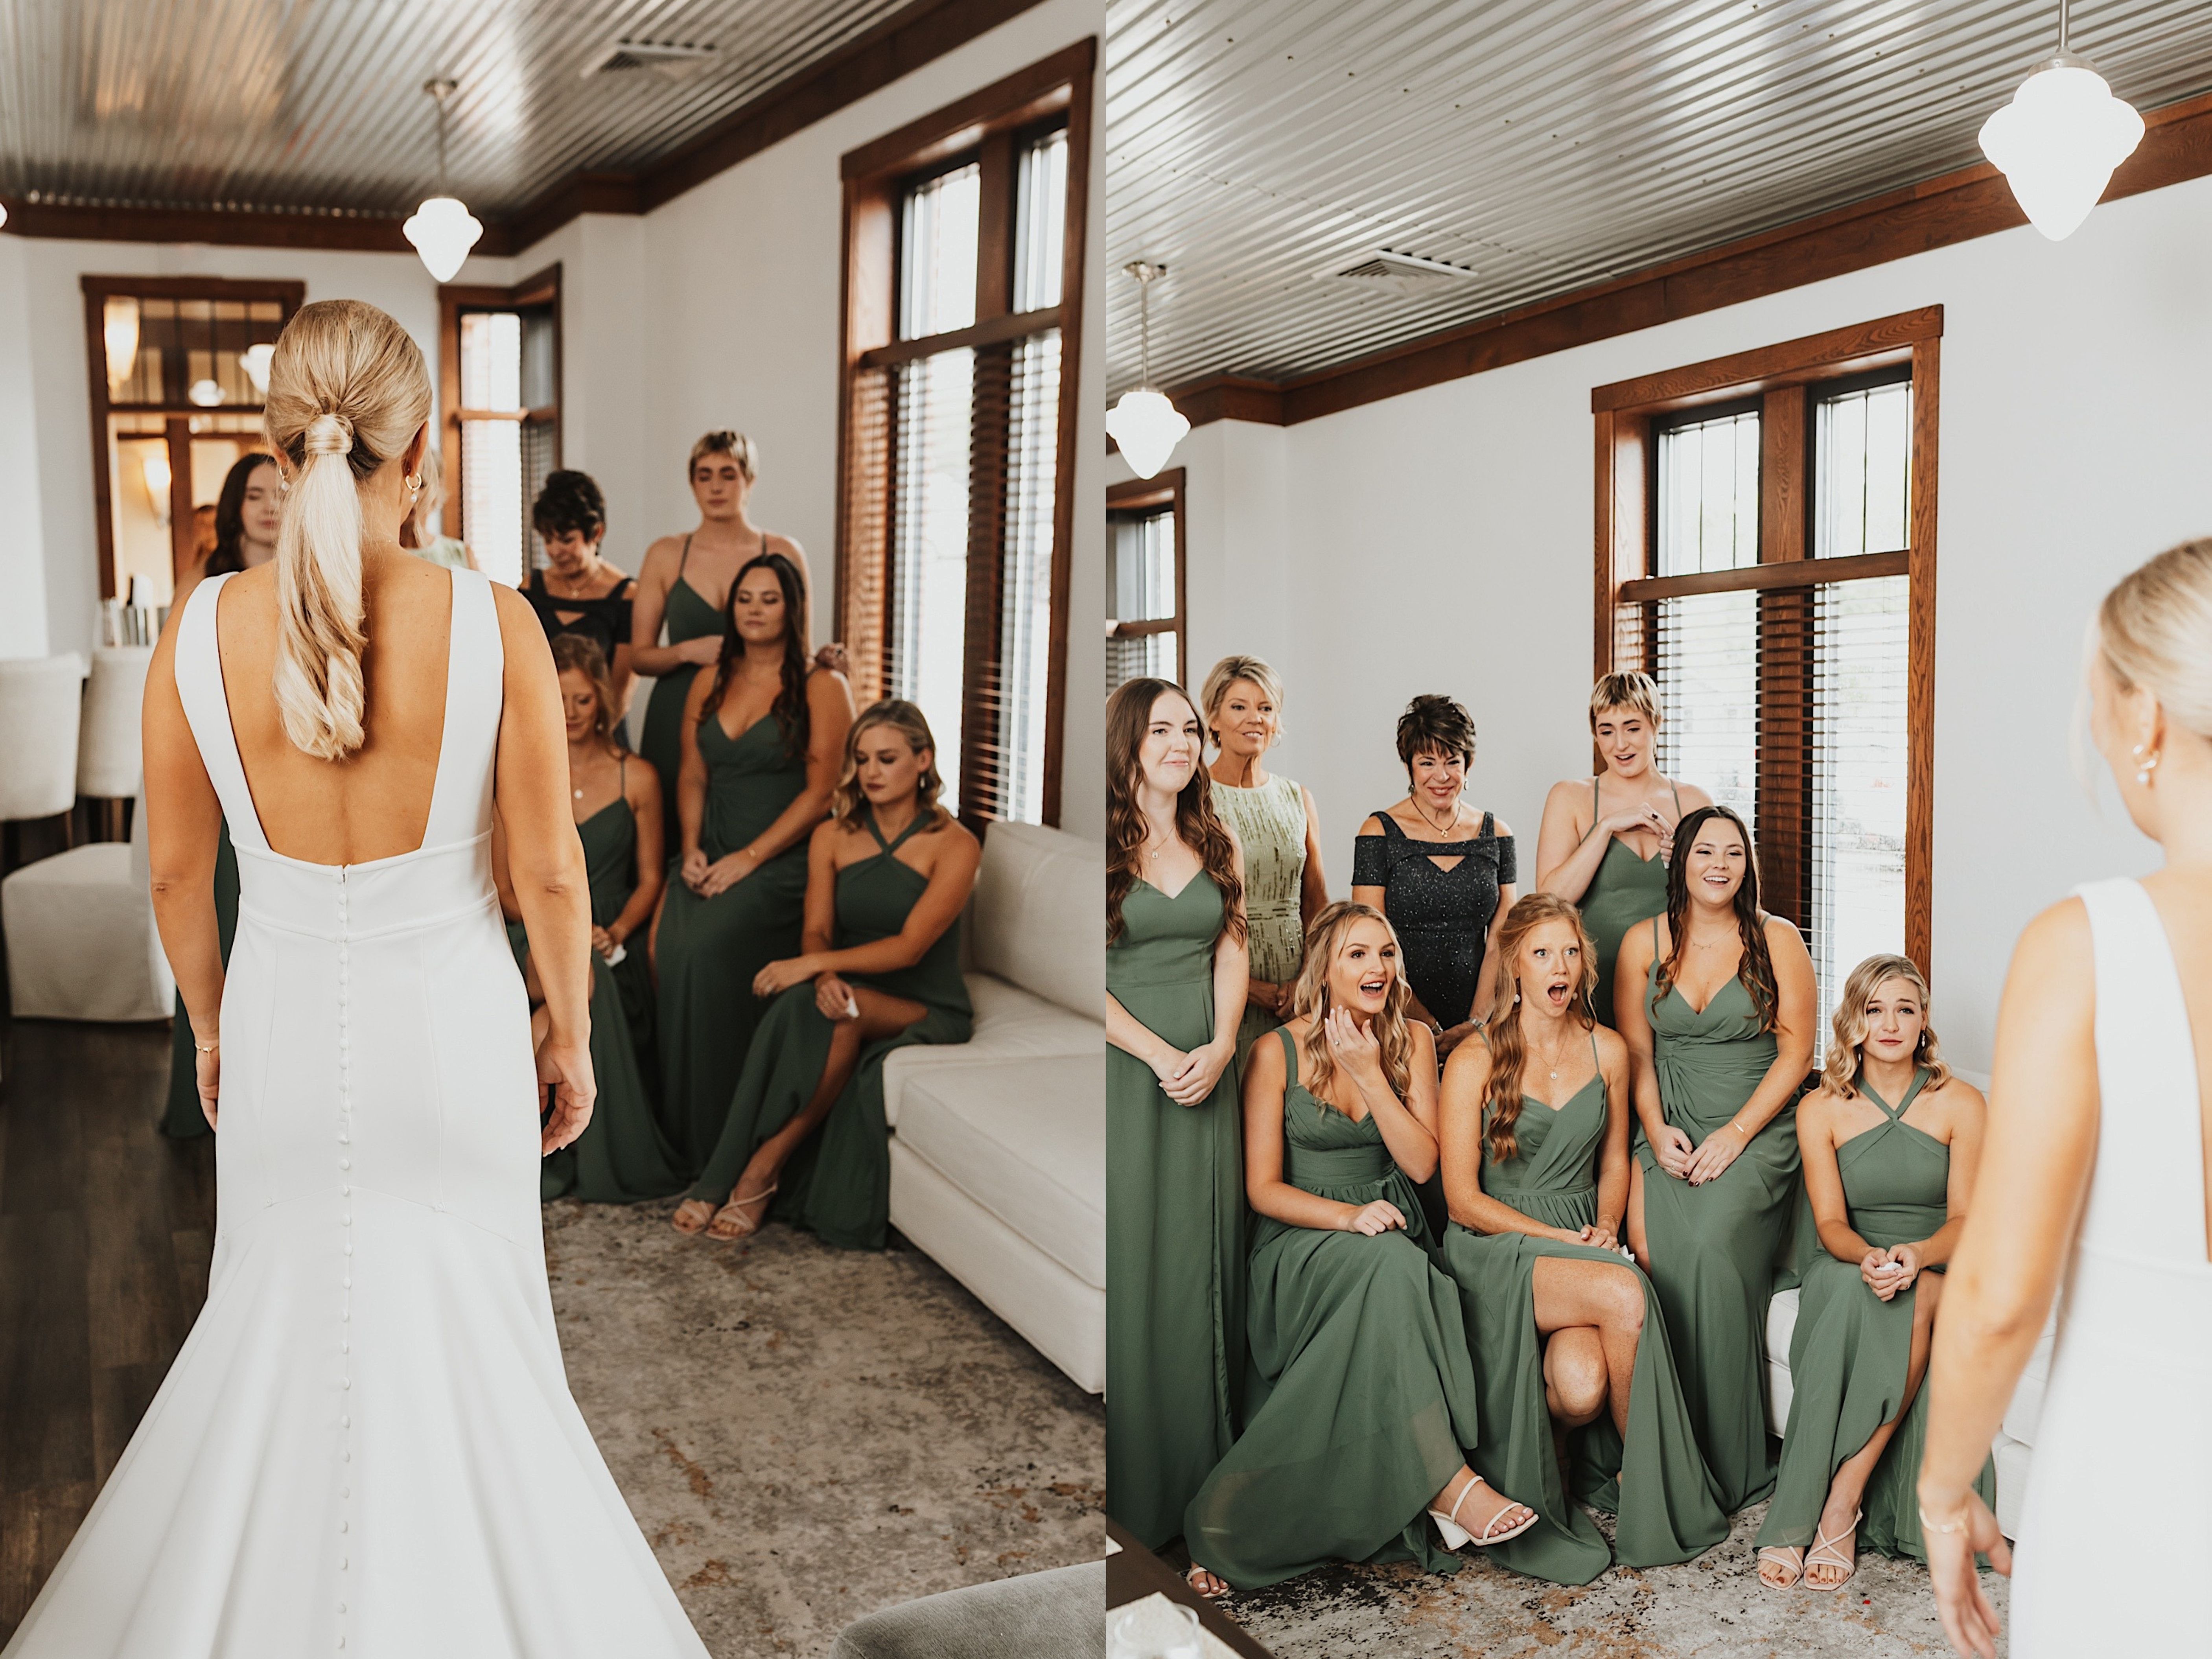 2 side by side photos, the left is of a bride in her wedding dress standing in front of her wedding party with their eyes closed, the right photo is the wedding party's reaction when they open their eyes